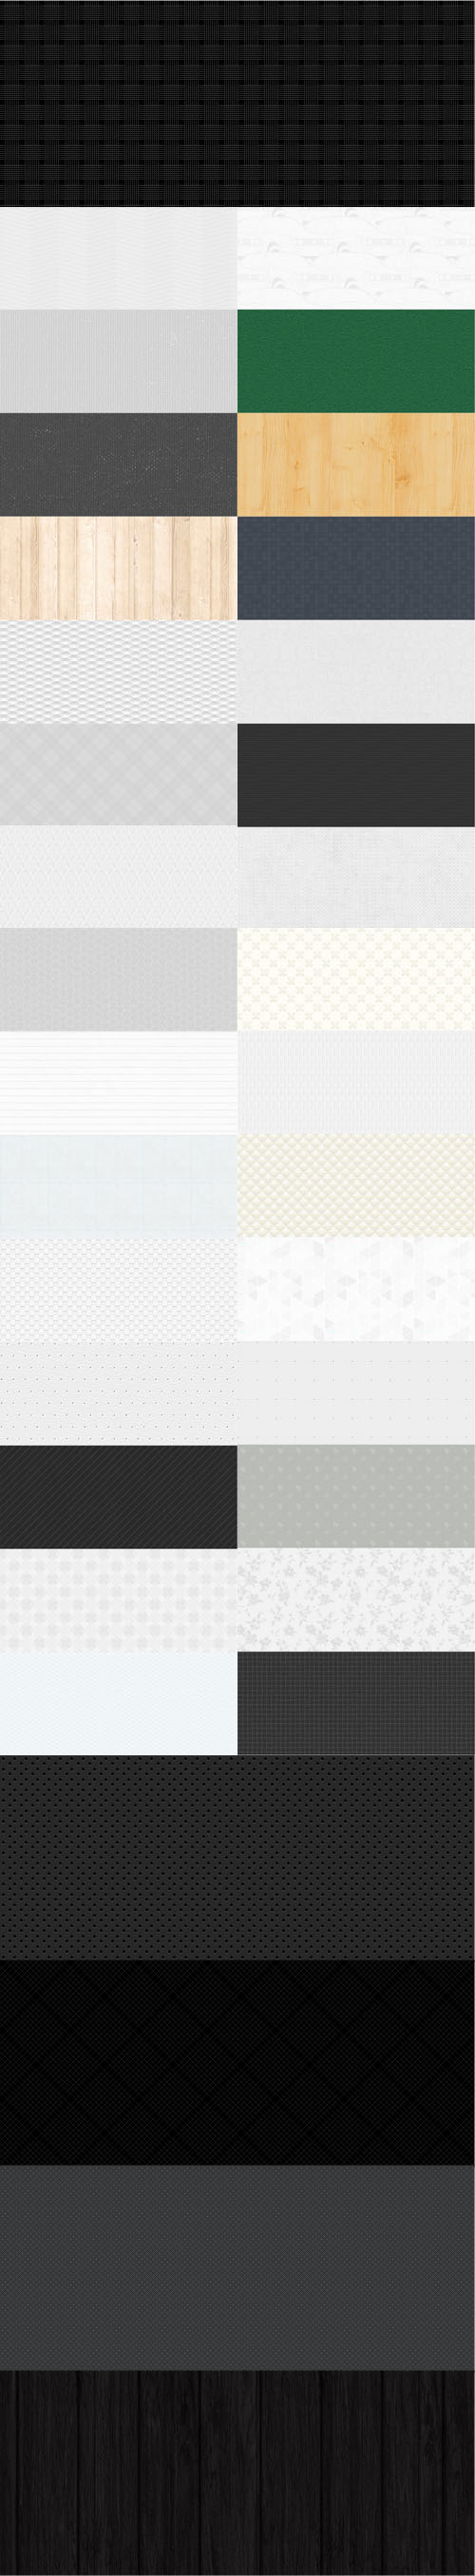 Colourful Photoshop Patterns Pack